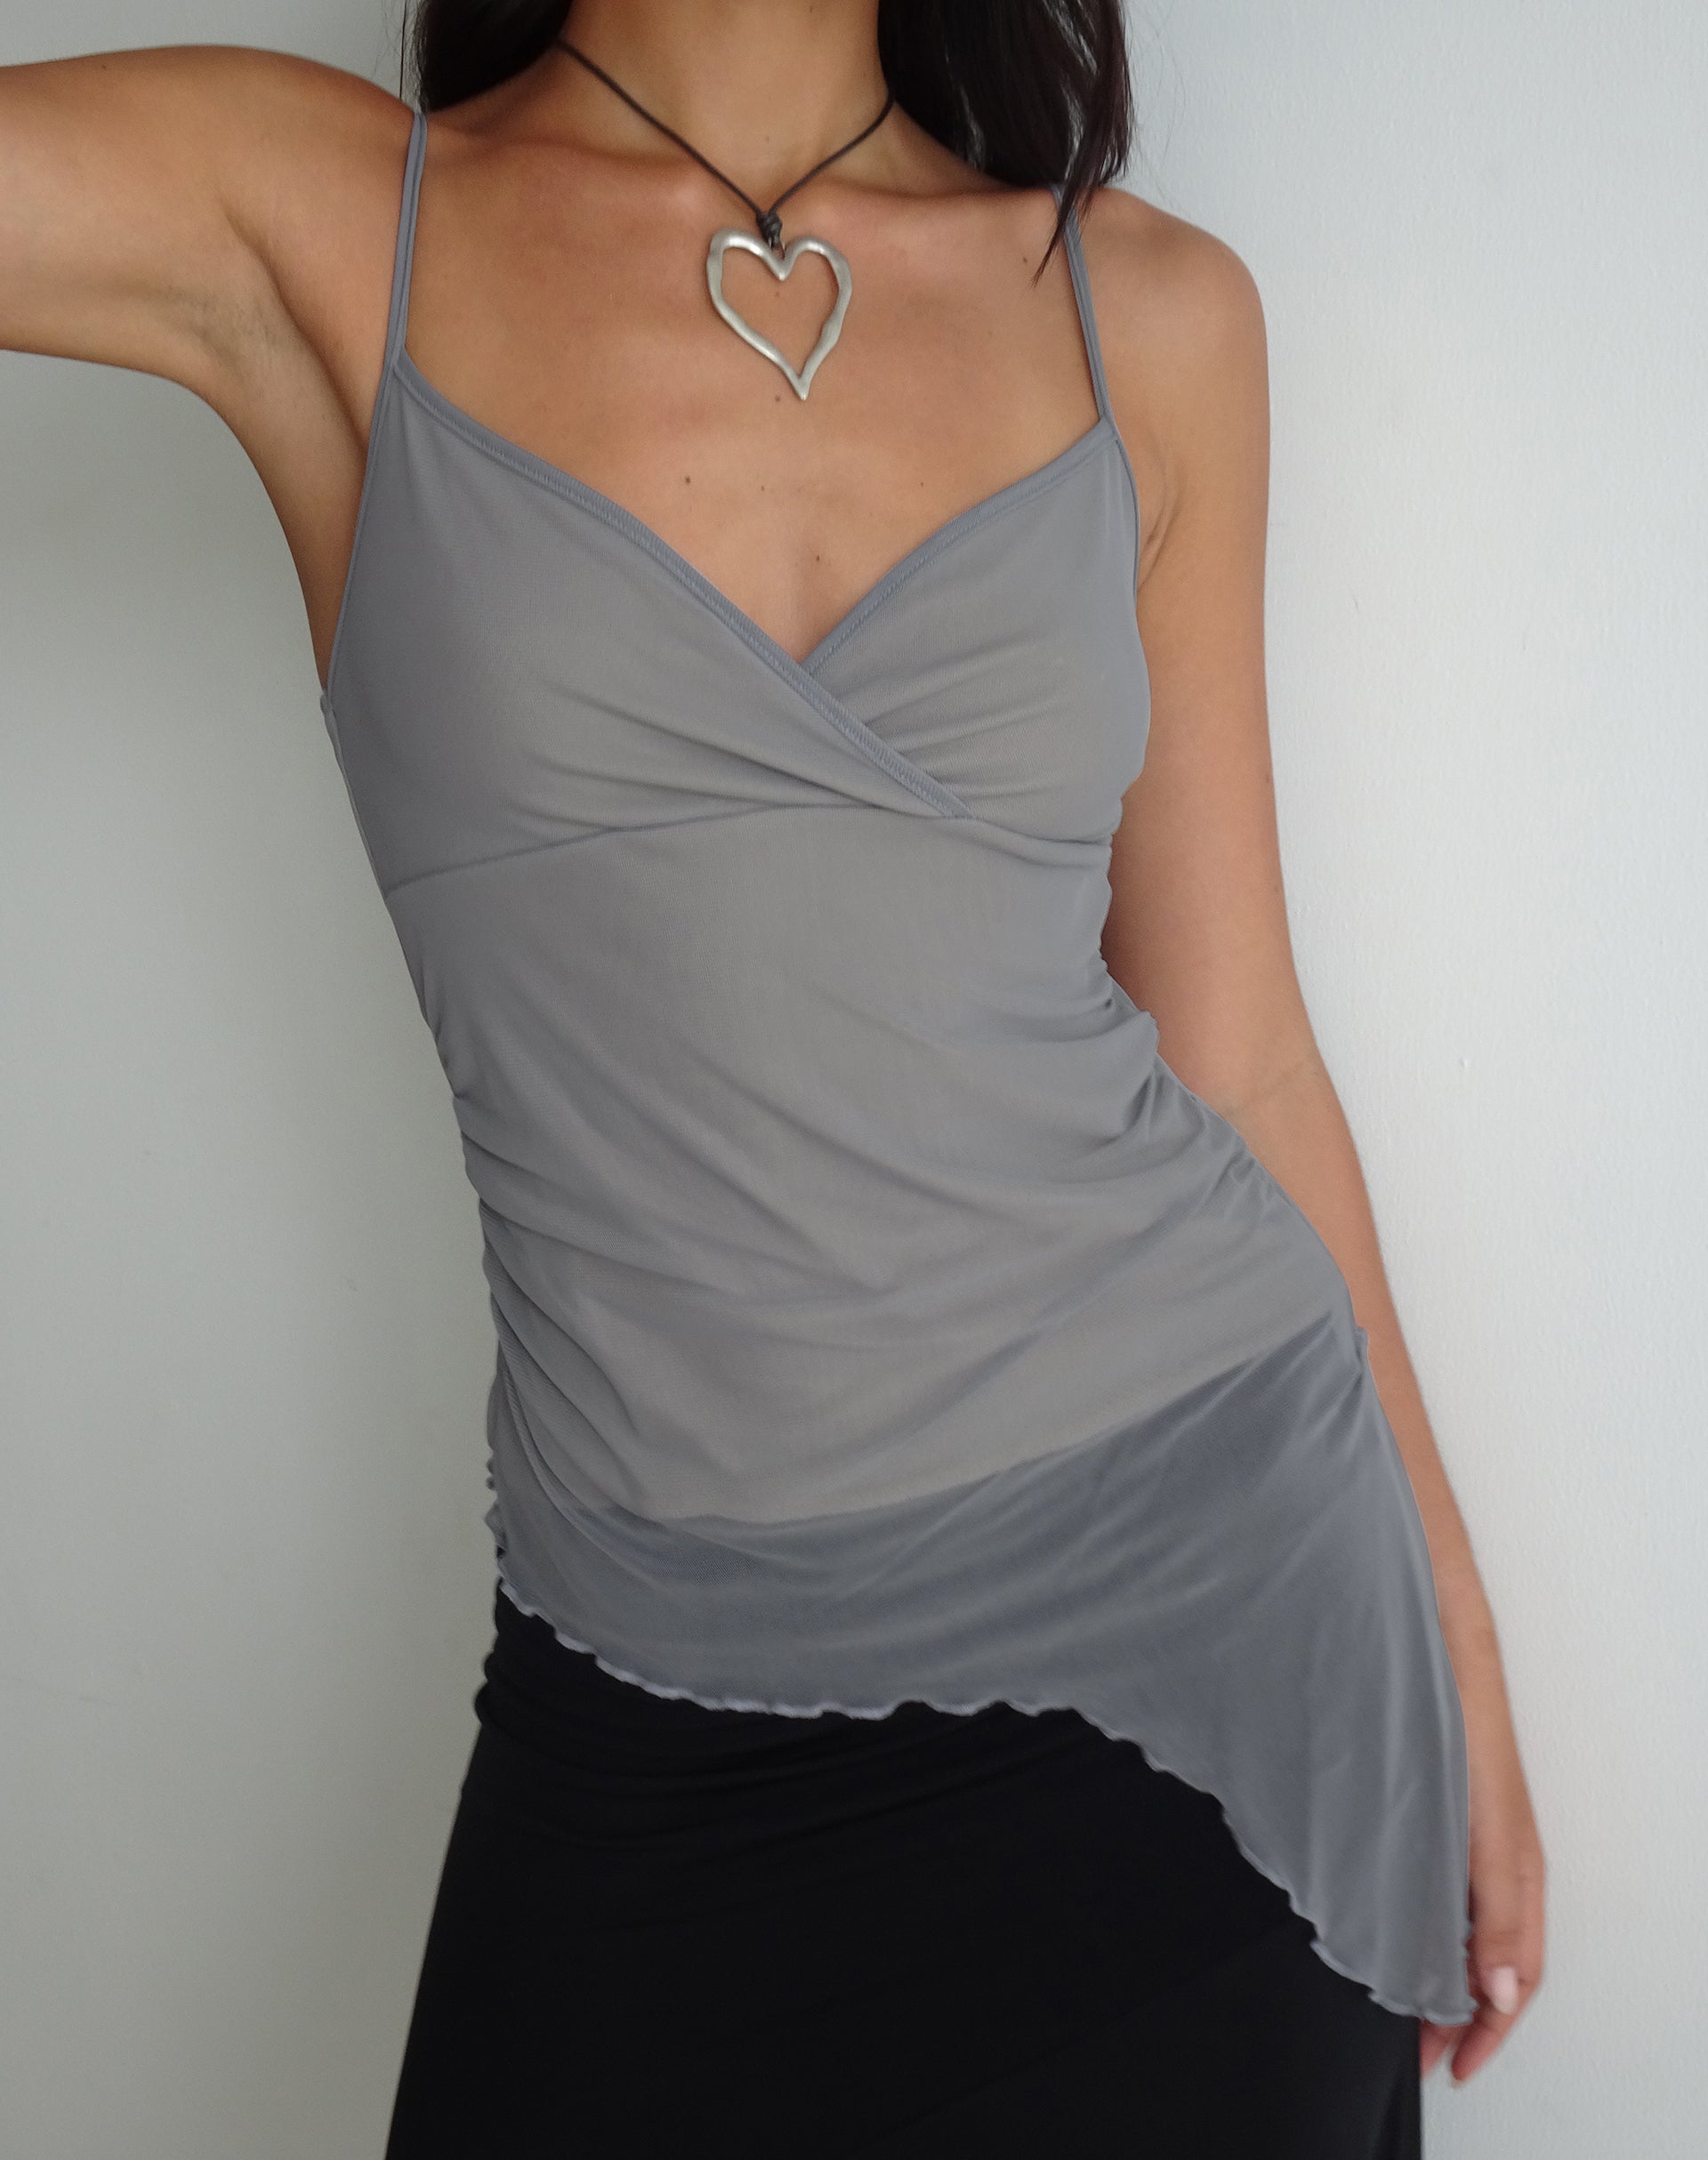 image of Waca Top in Light Grey with Cream Lining